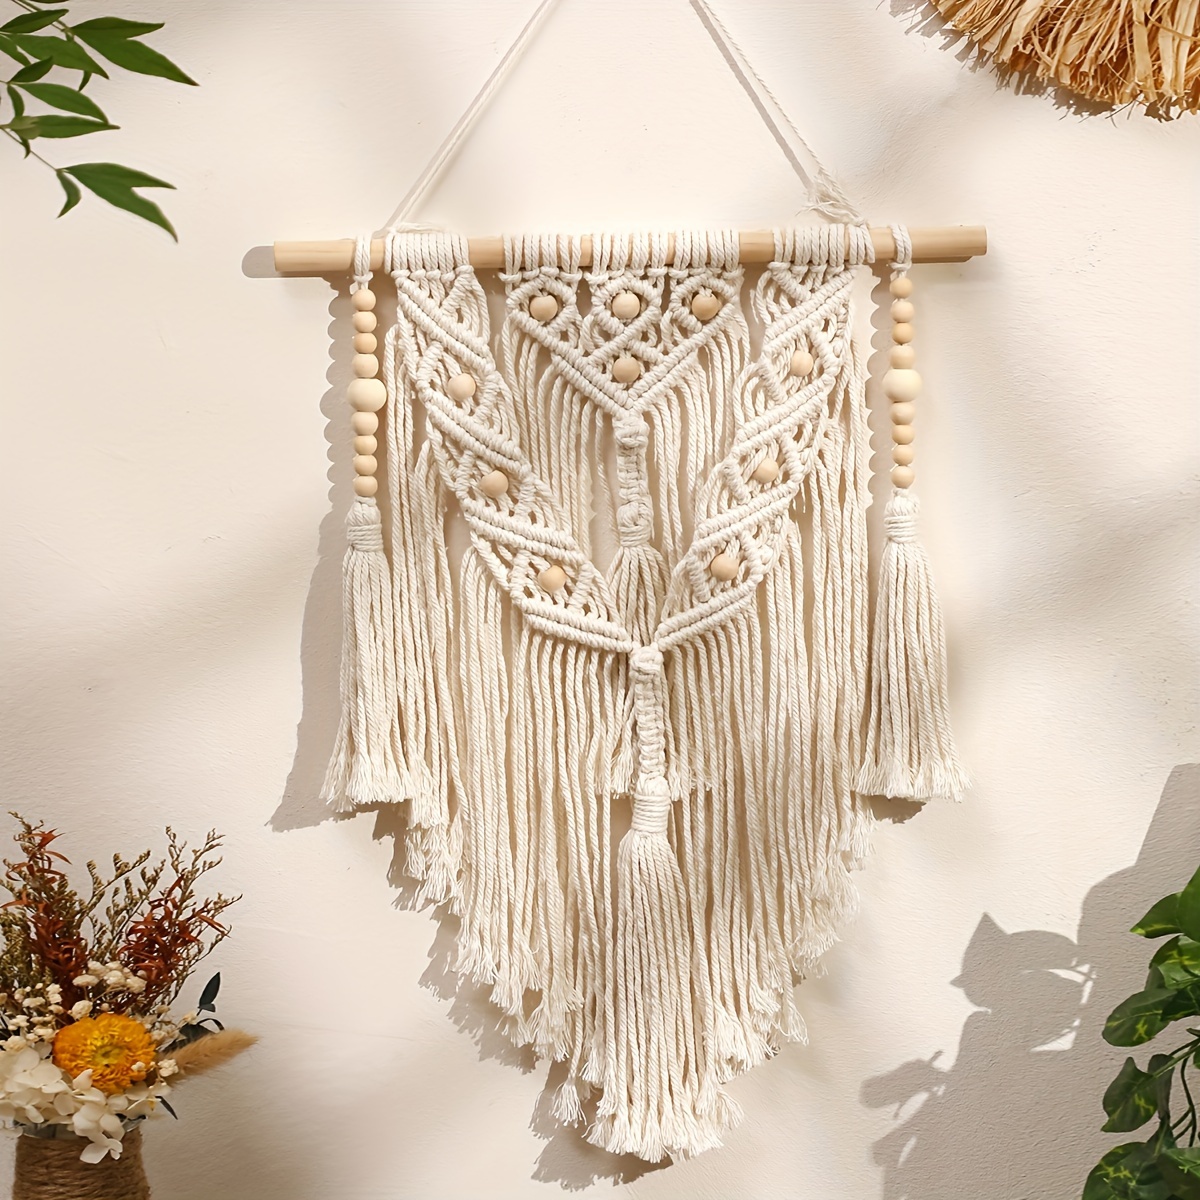 How to make wall hanging with beads - Hanging beads decoration - home decor  ideas for living room 